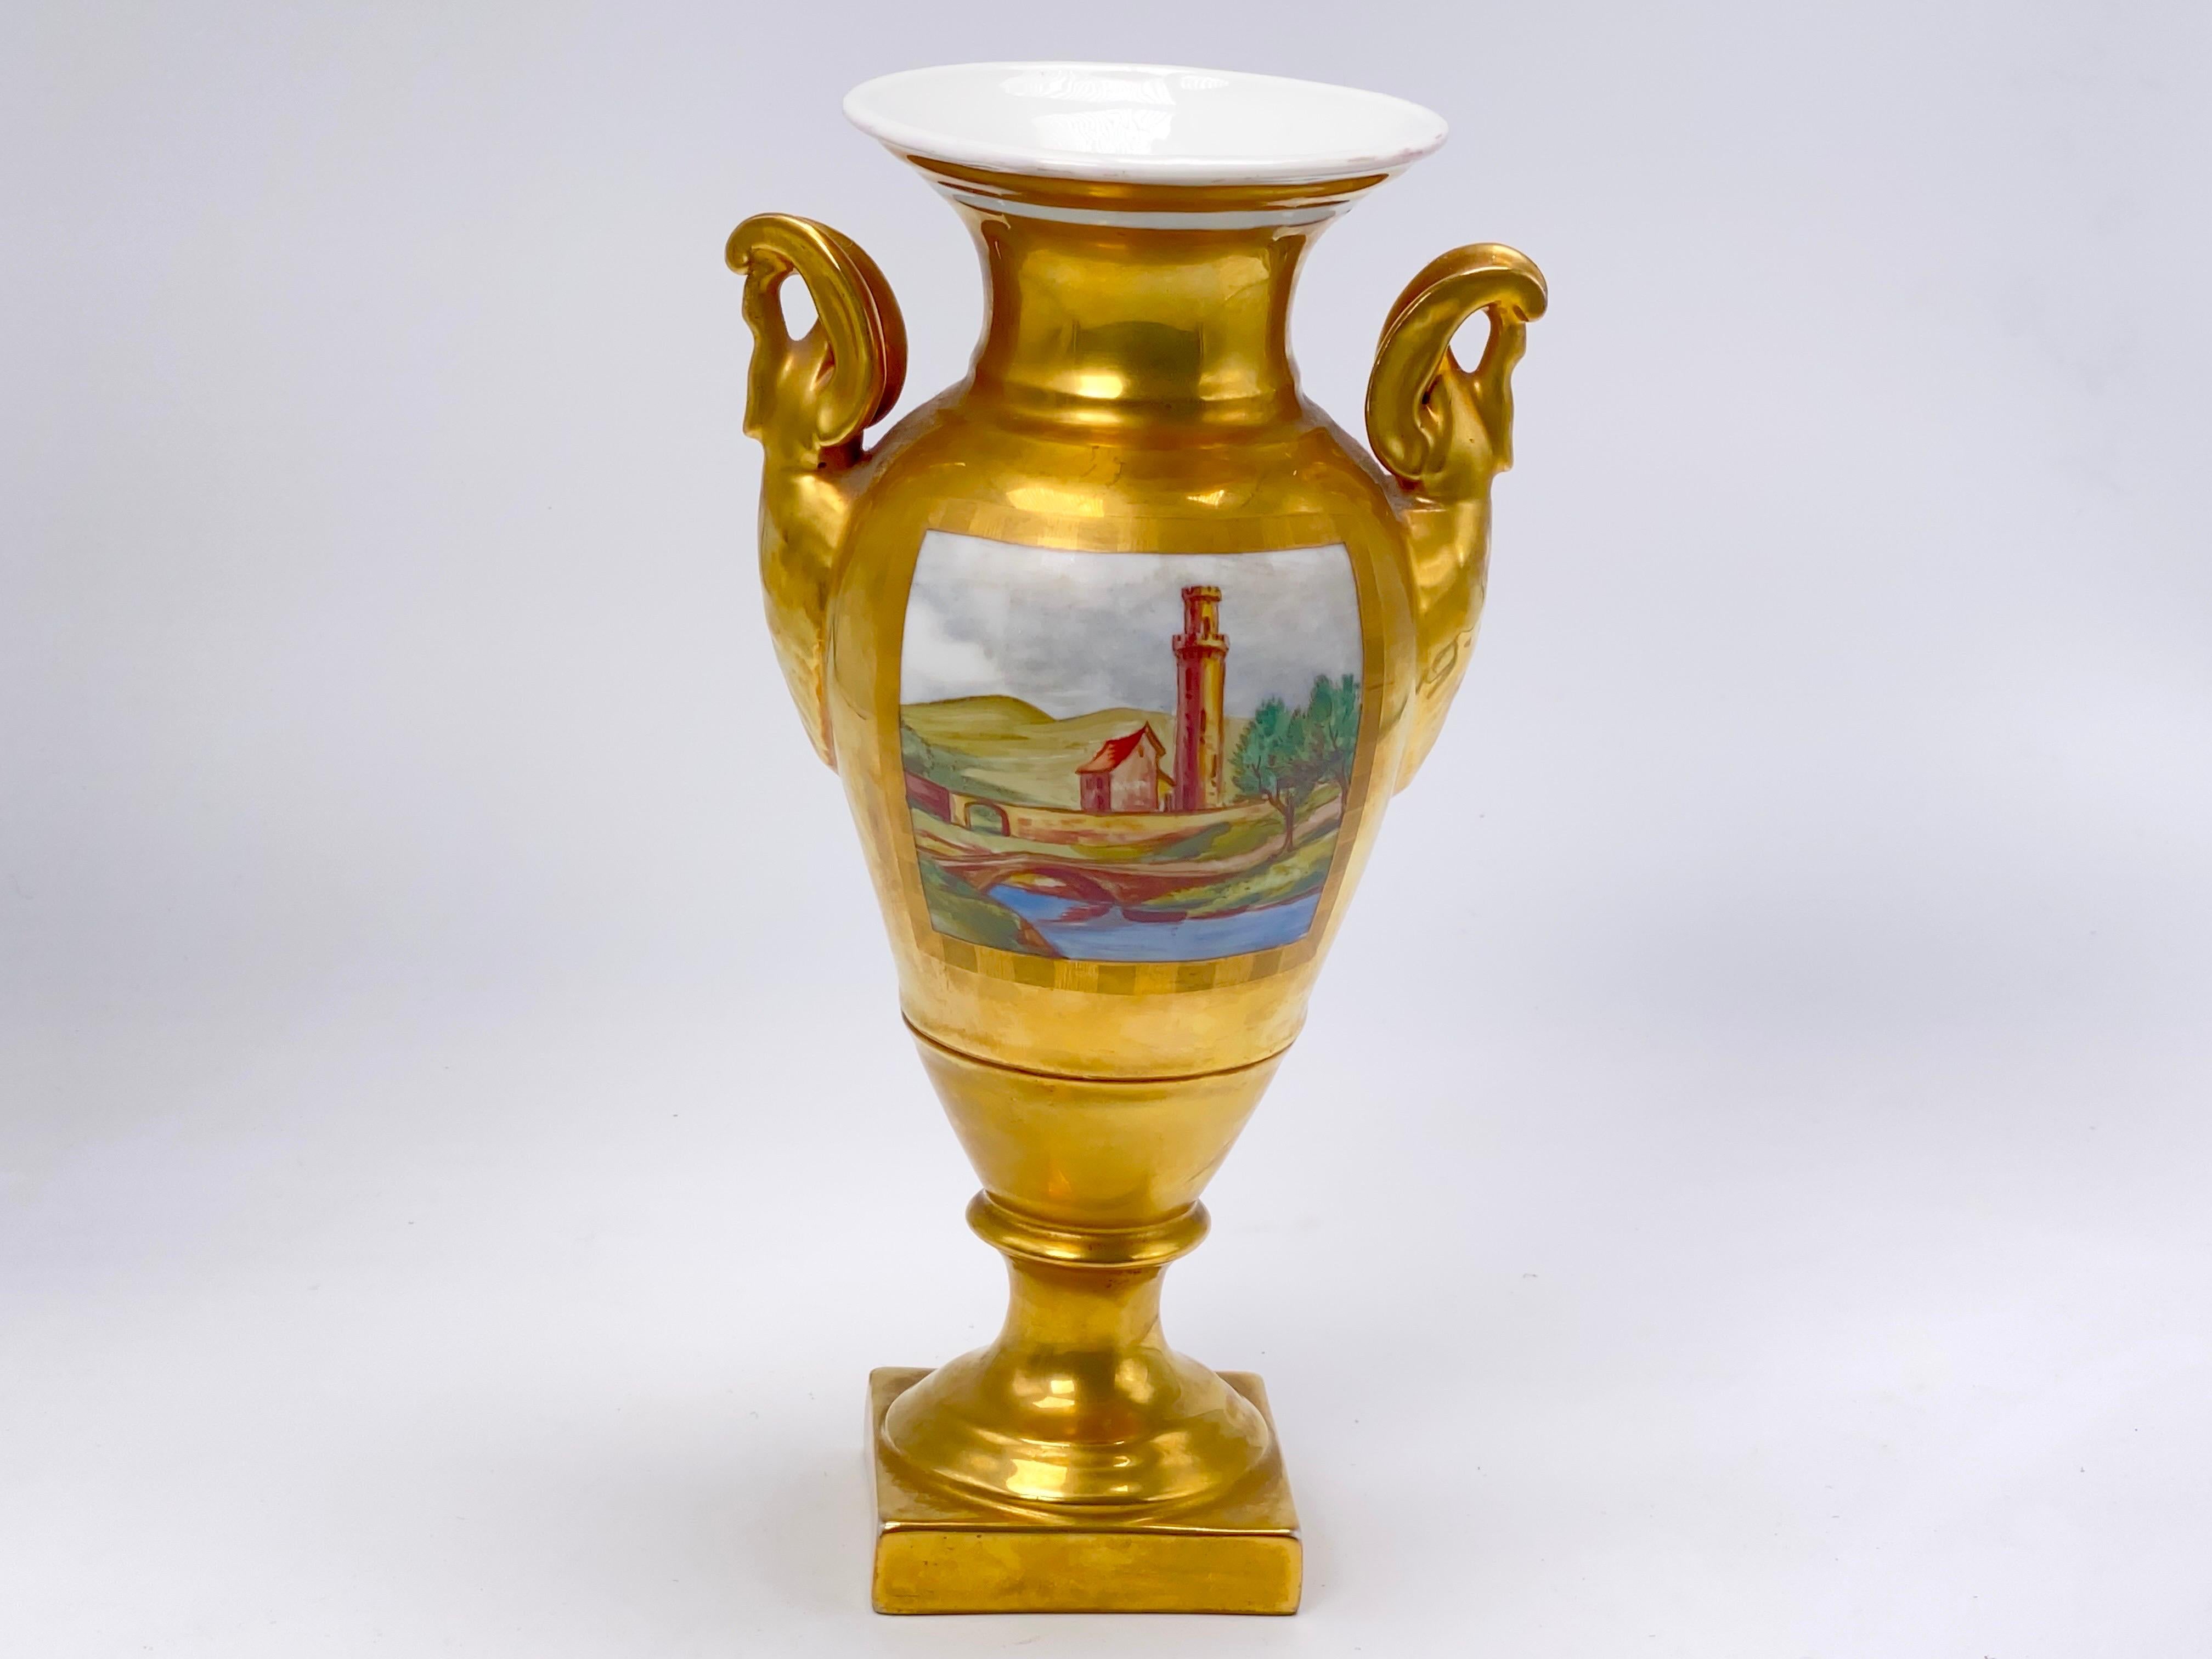 This porcelain Vase has been made by Jacob Petit, it is signed J.P., and the manufacturer is 